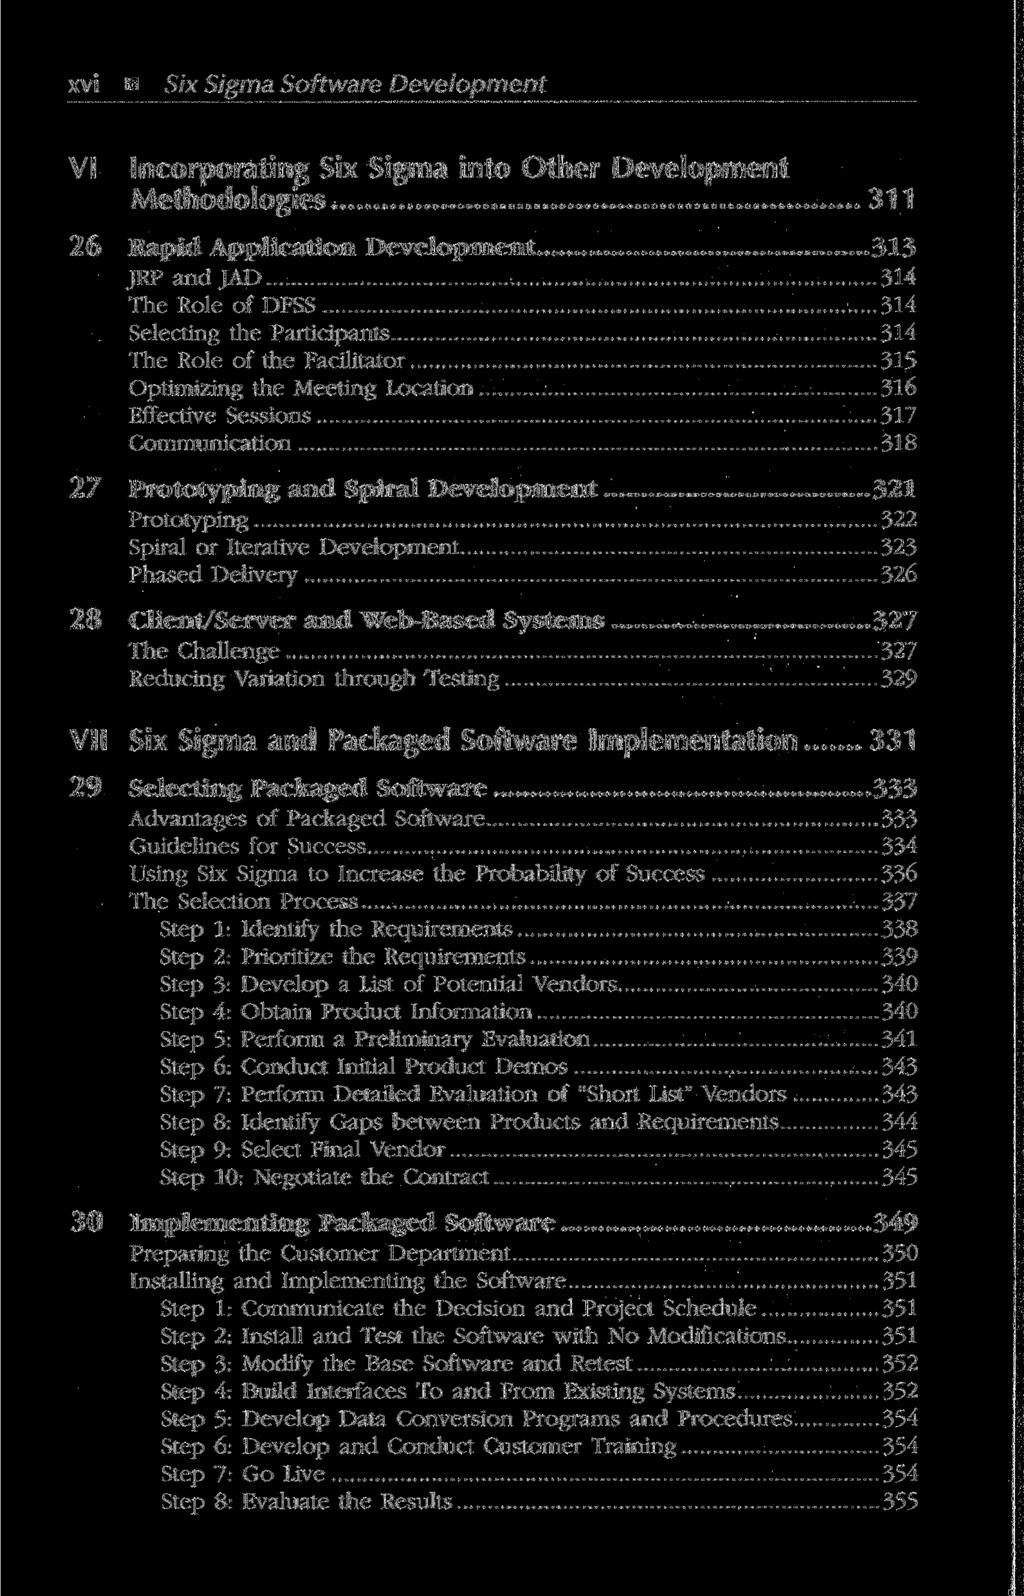 xvi Six Sigma Software Development VI Incorporating Six Sigma into Other Development Methodologies 311 26 Rapid Application Development 313 JRP and JAD 314 The Role of DFSS 314 Selecting the